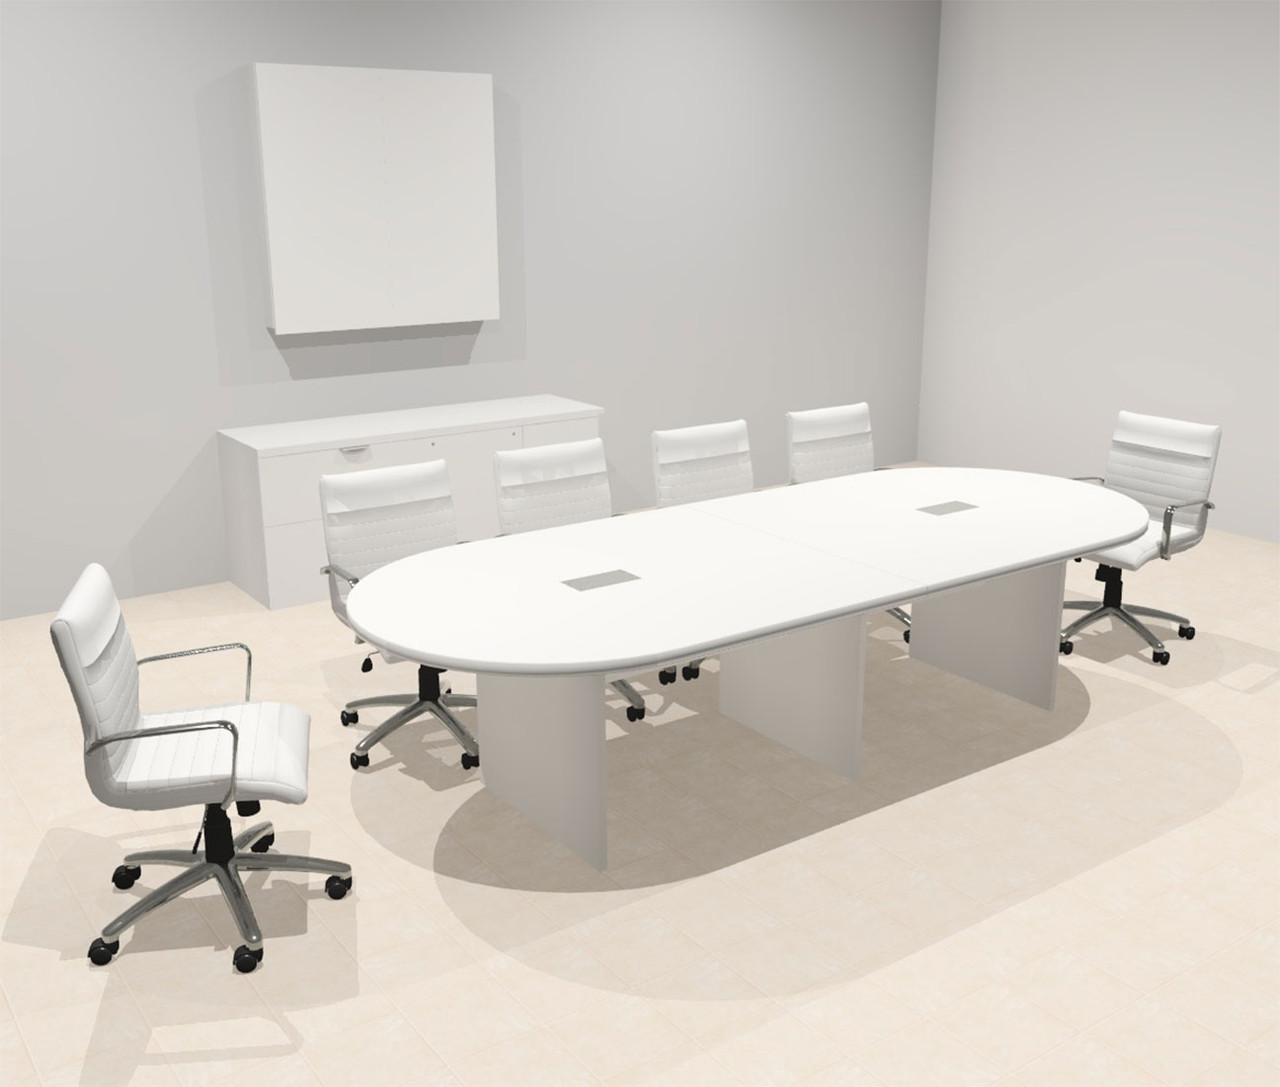 Modern Racetrack 10' Feet Conference Table, #OF-CON-CR1